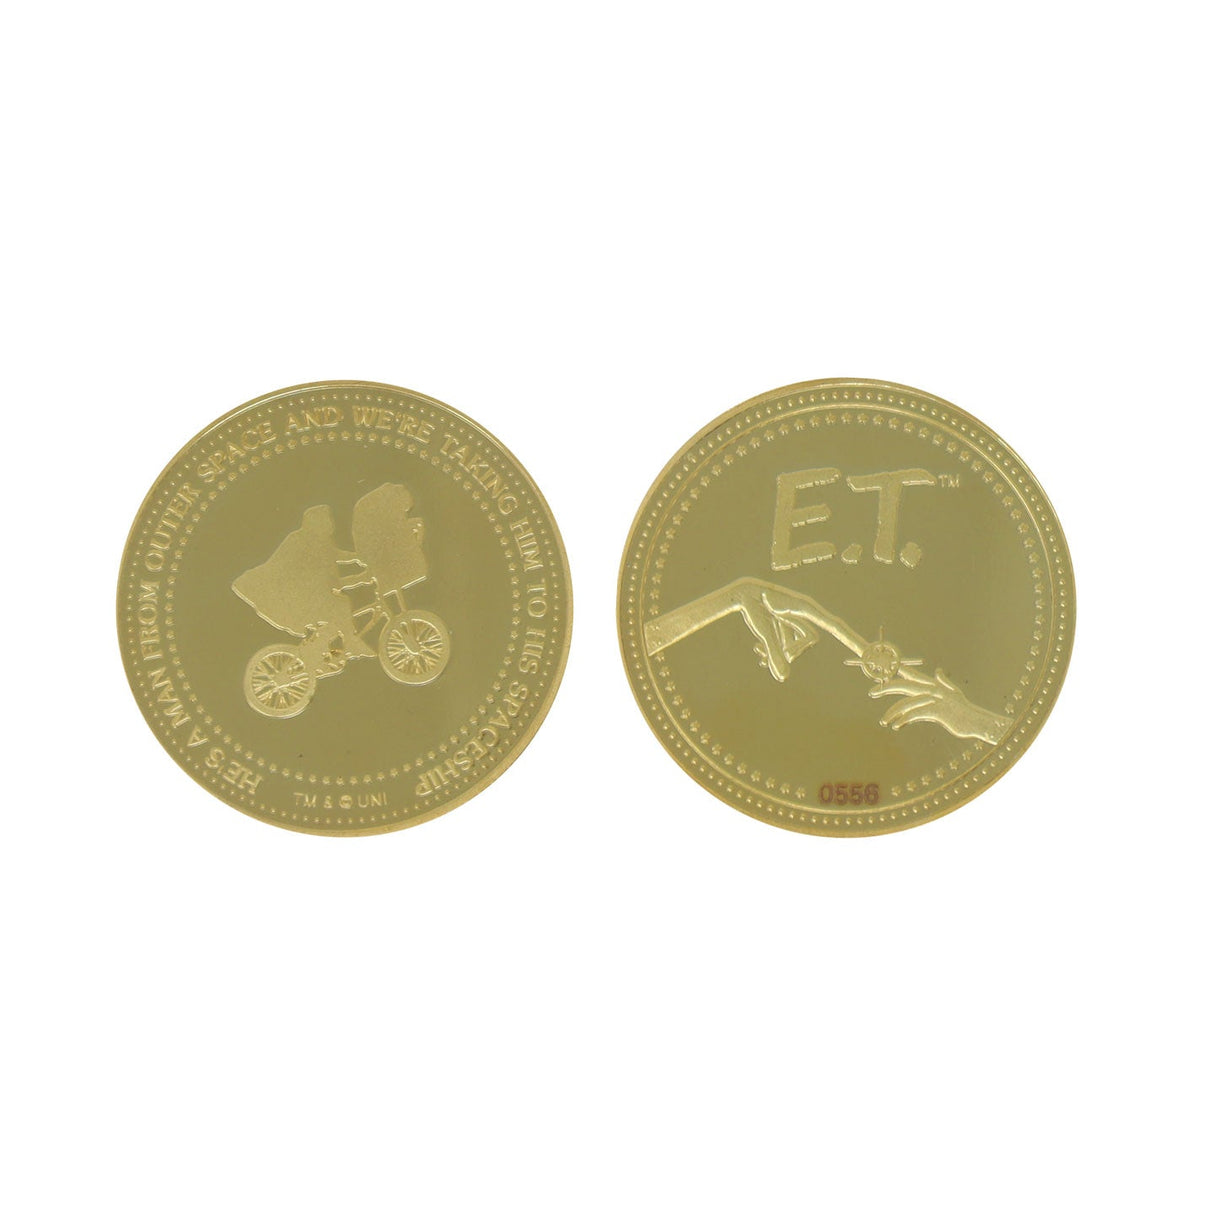 E.T. Limited Edition Collectible Coin (Gold)